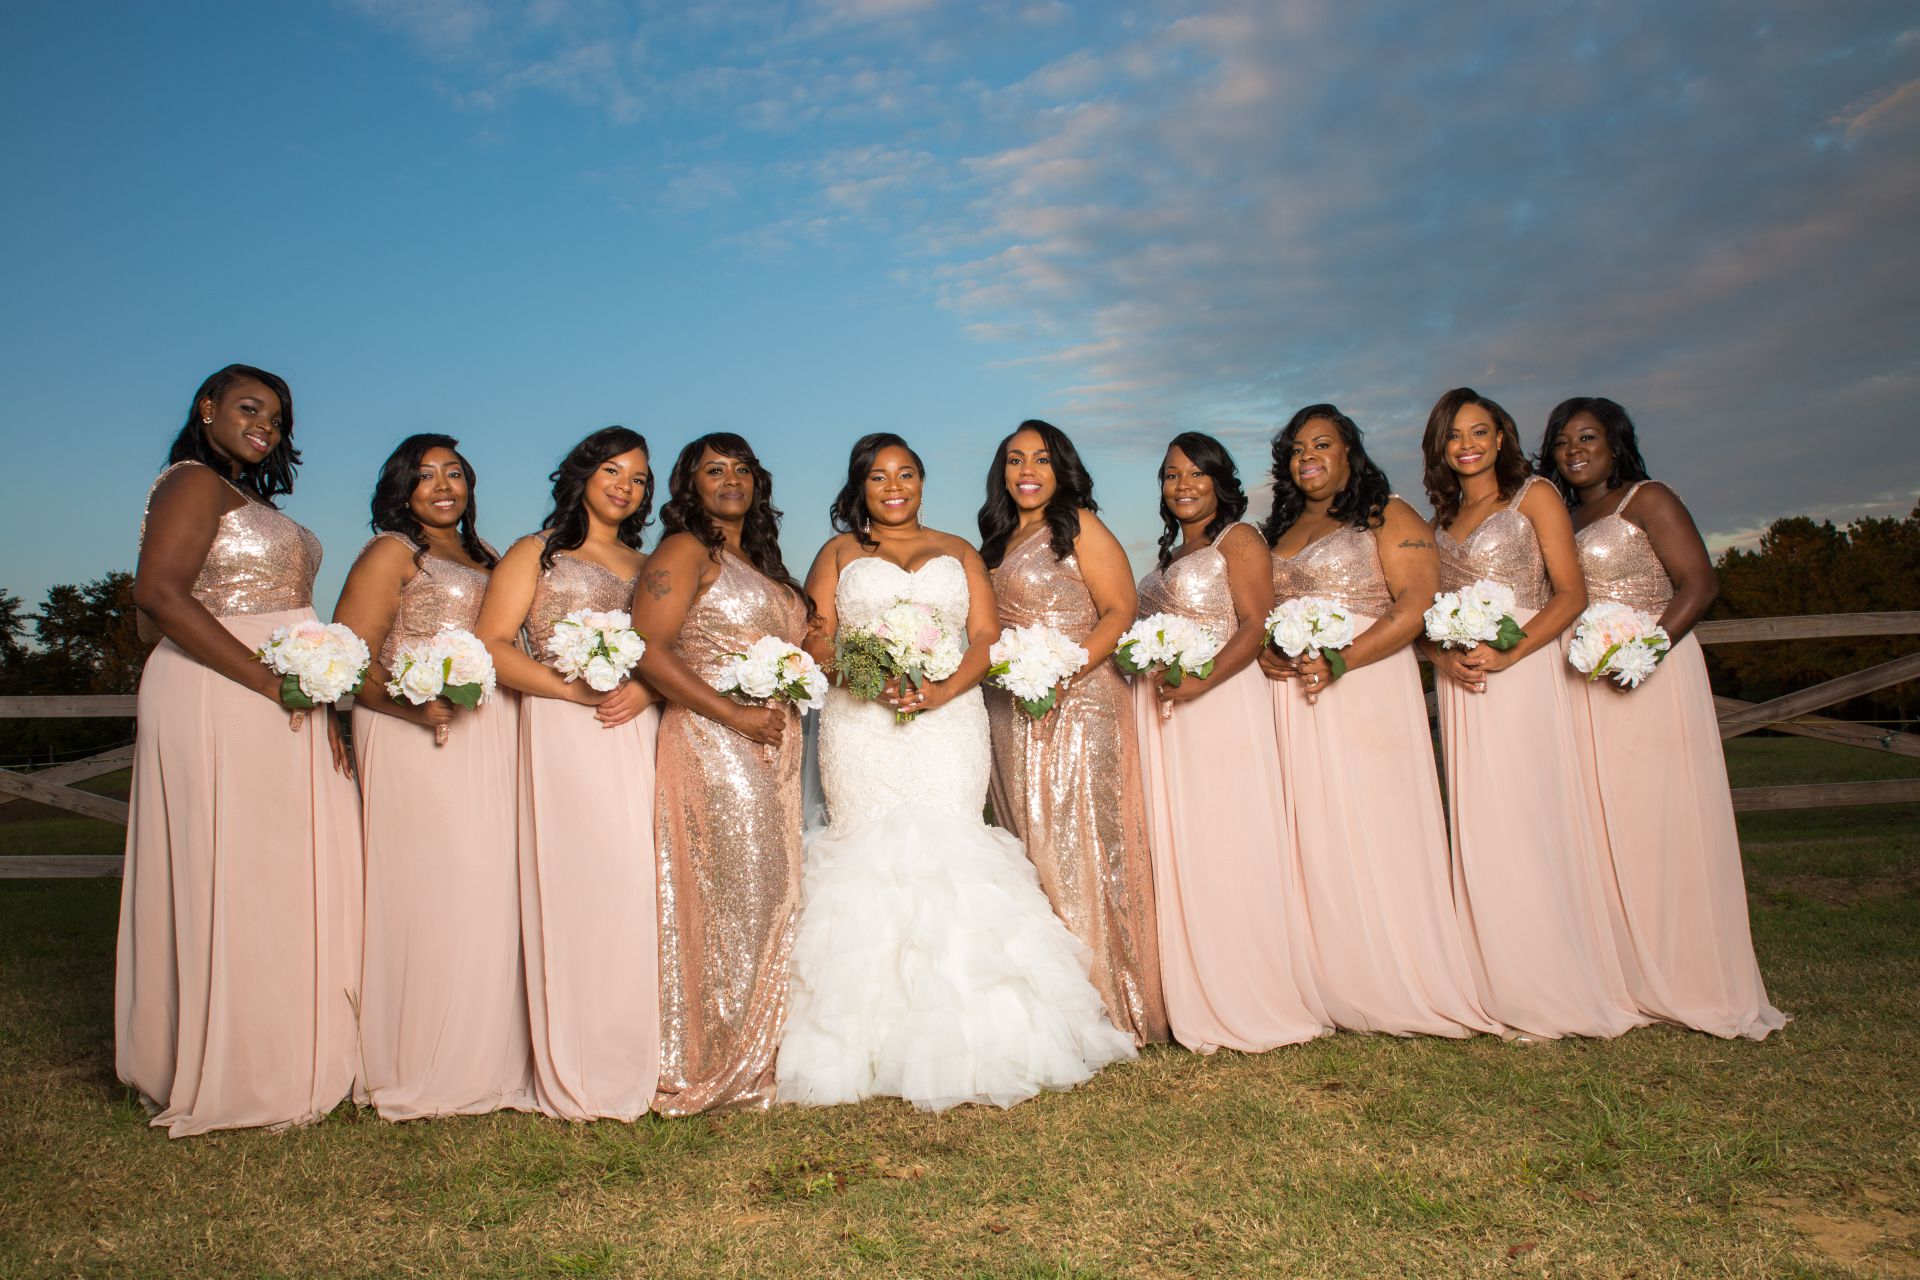 An image of bride with her bridesmaids holding flowers